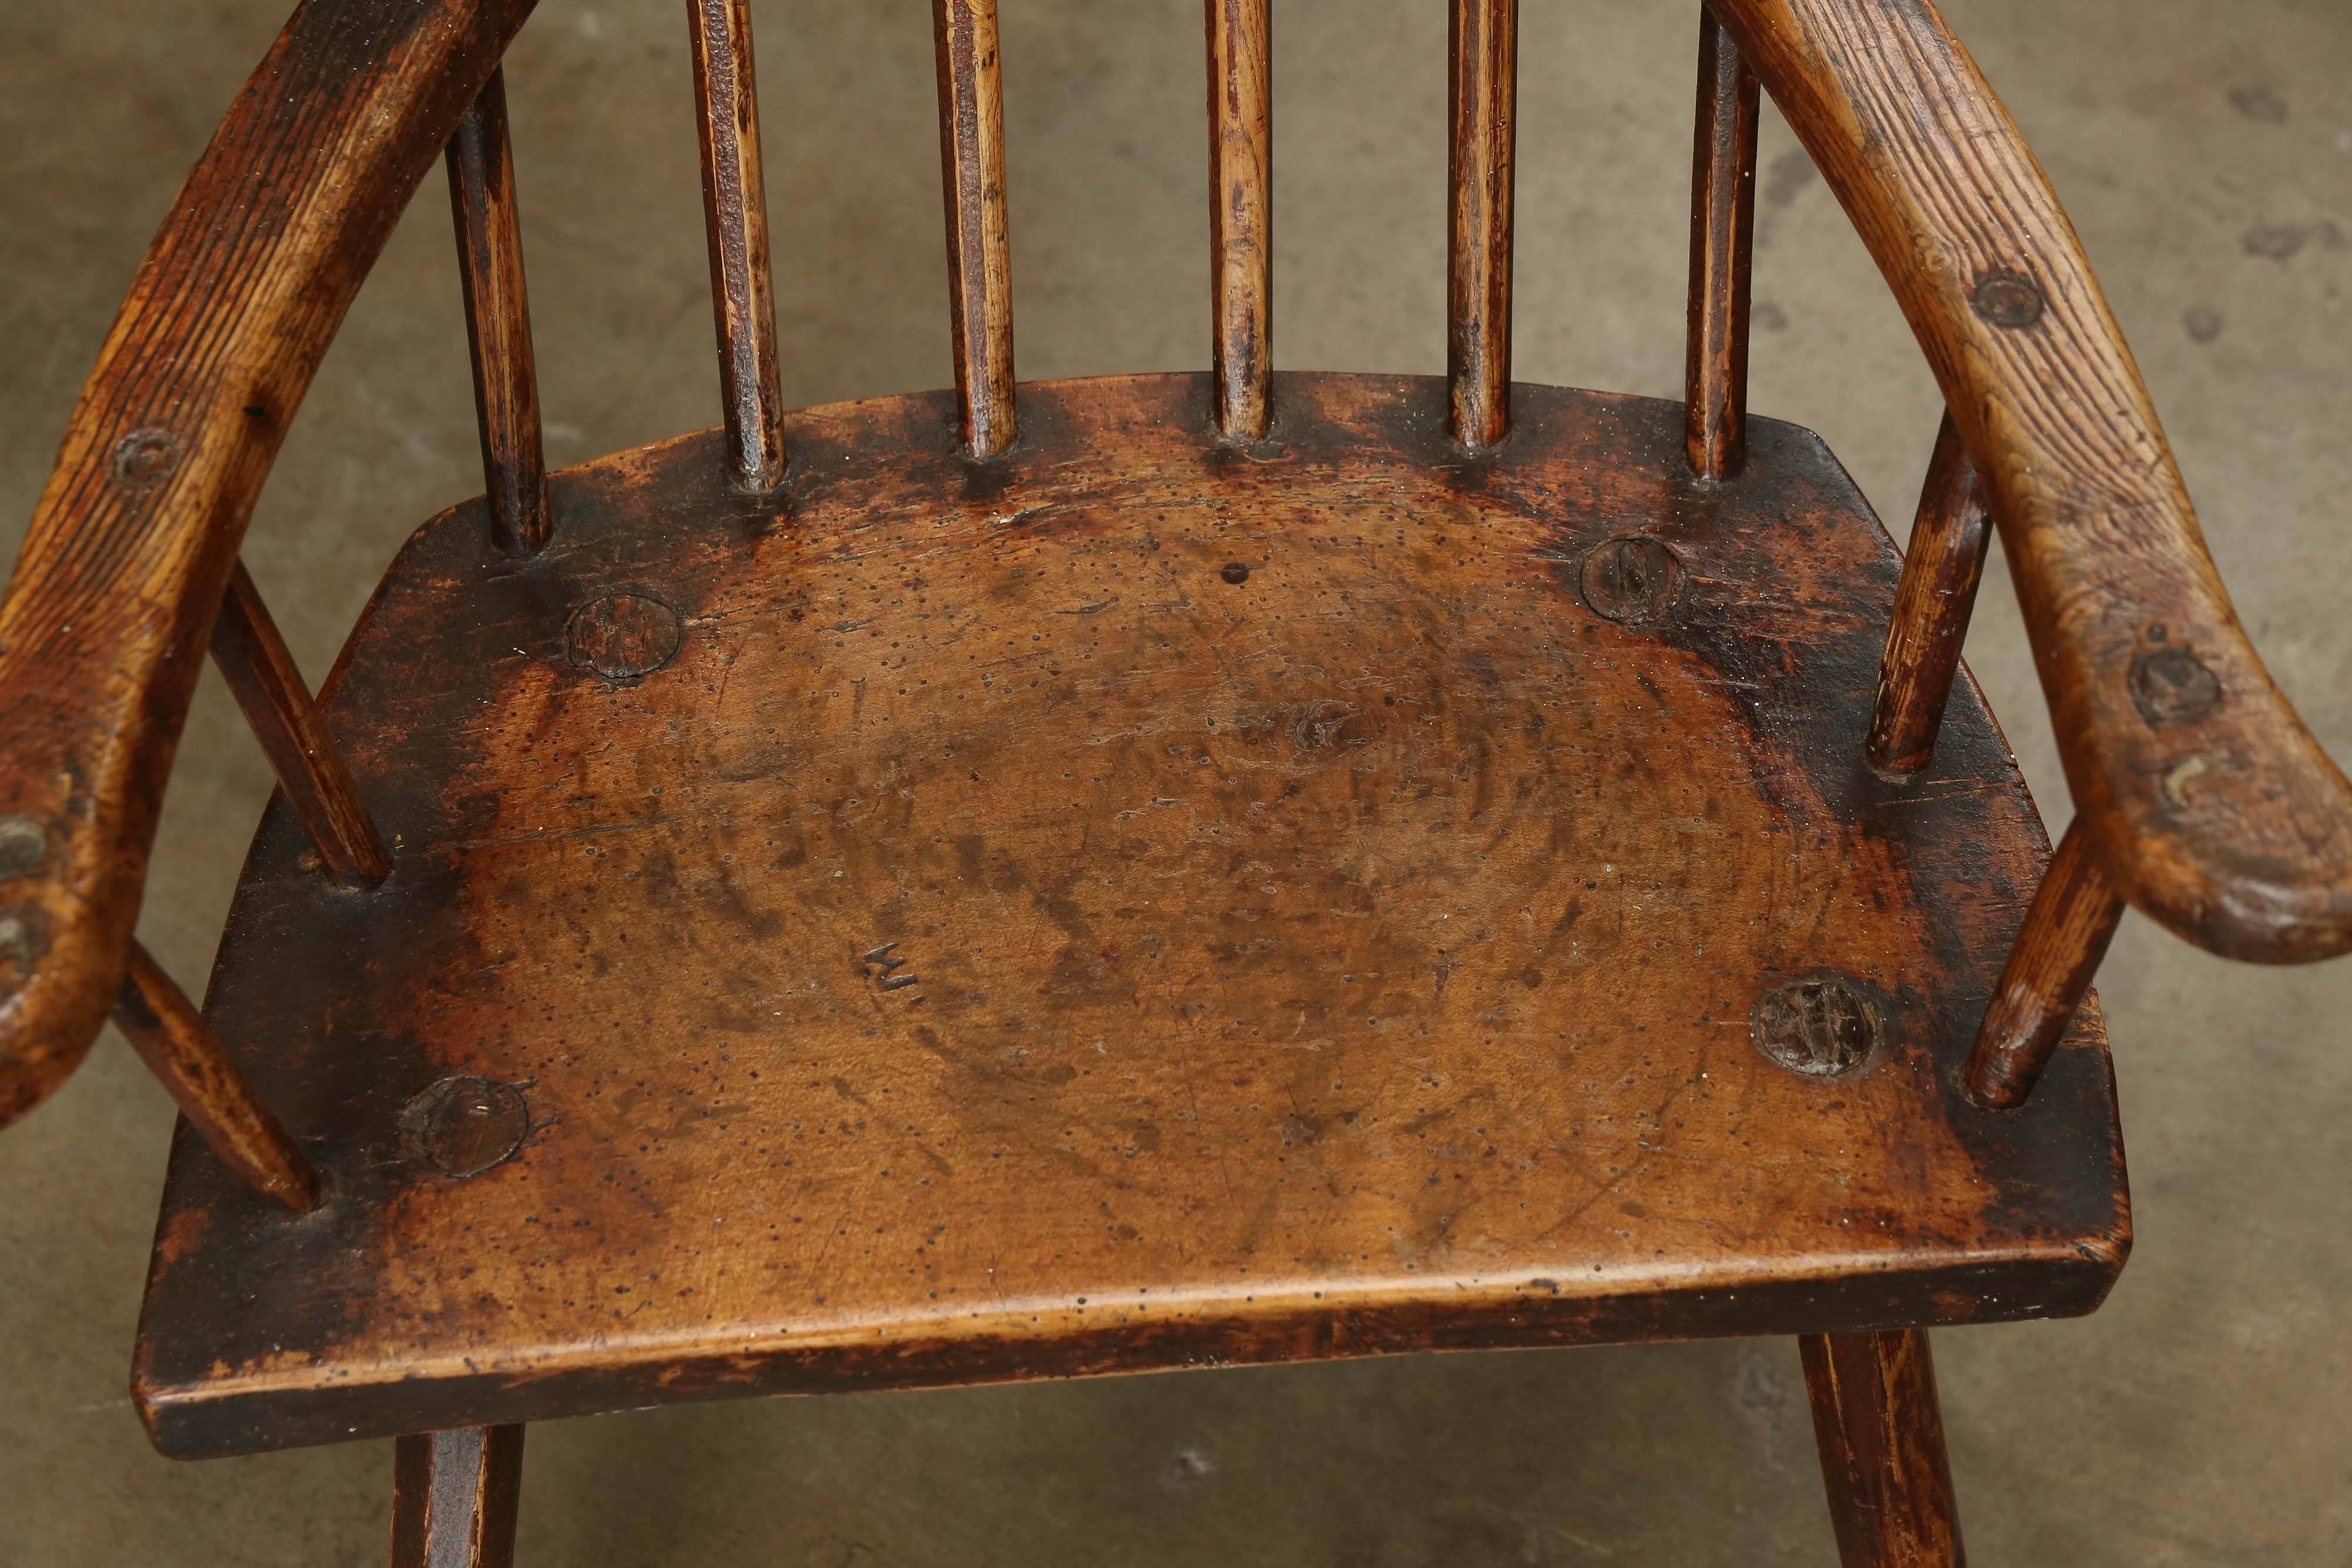 Folk Art stick chair from the English Countryside. Thick seat and surprisingly comfortable. Wonderful piece of sculpture with great patina. Seat height is 13.75 inches.